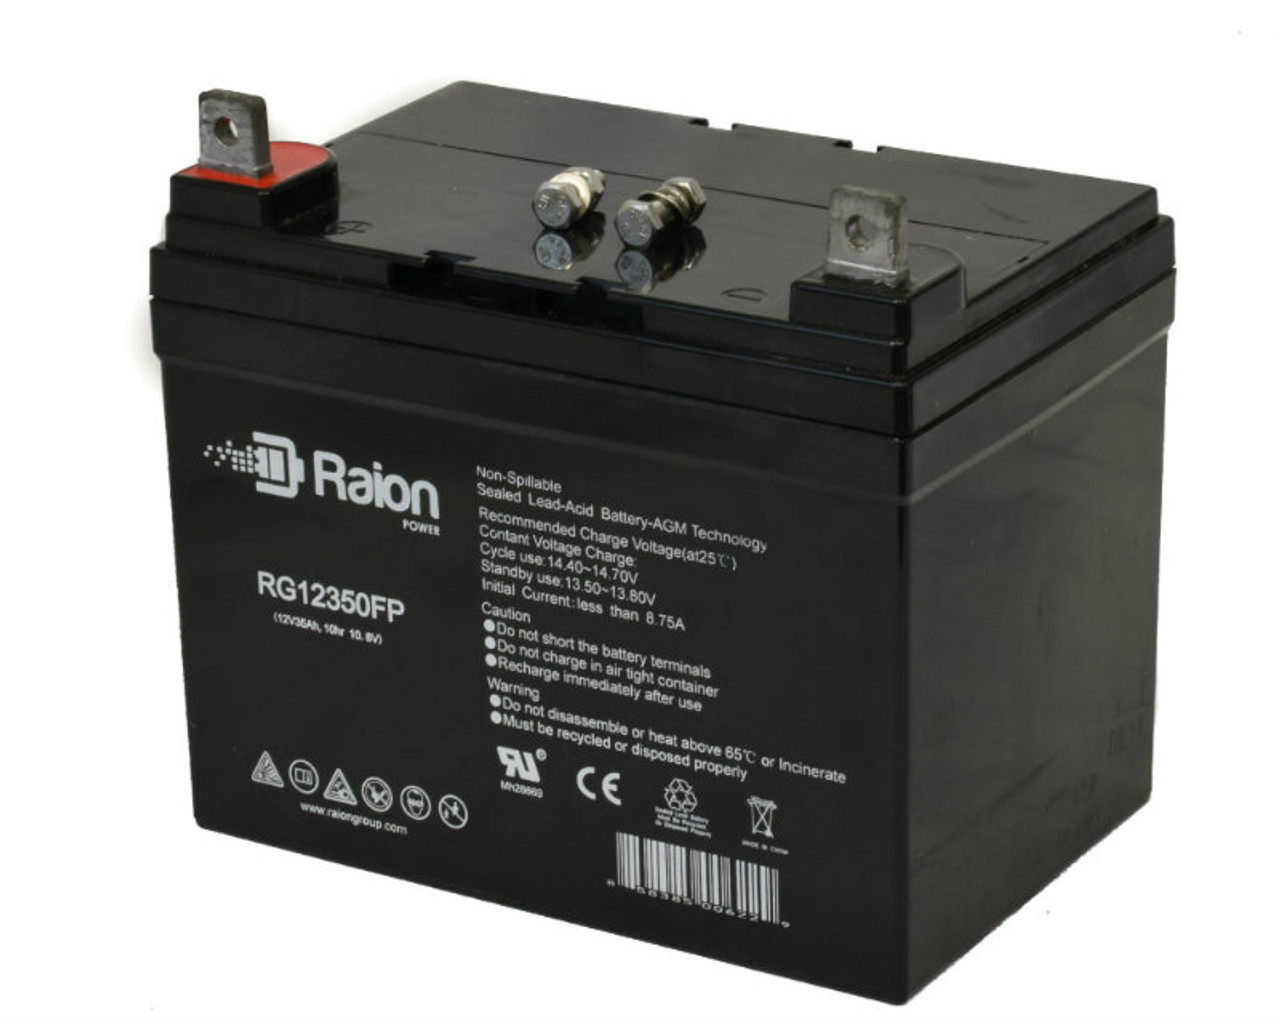 Raion Power Replacement 12V 35Ah RG12350FP Mobility Scooter Battery for Electric Mobility Lil Viva 410 PC